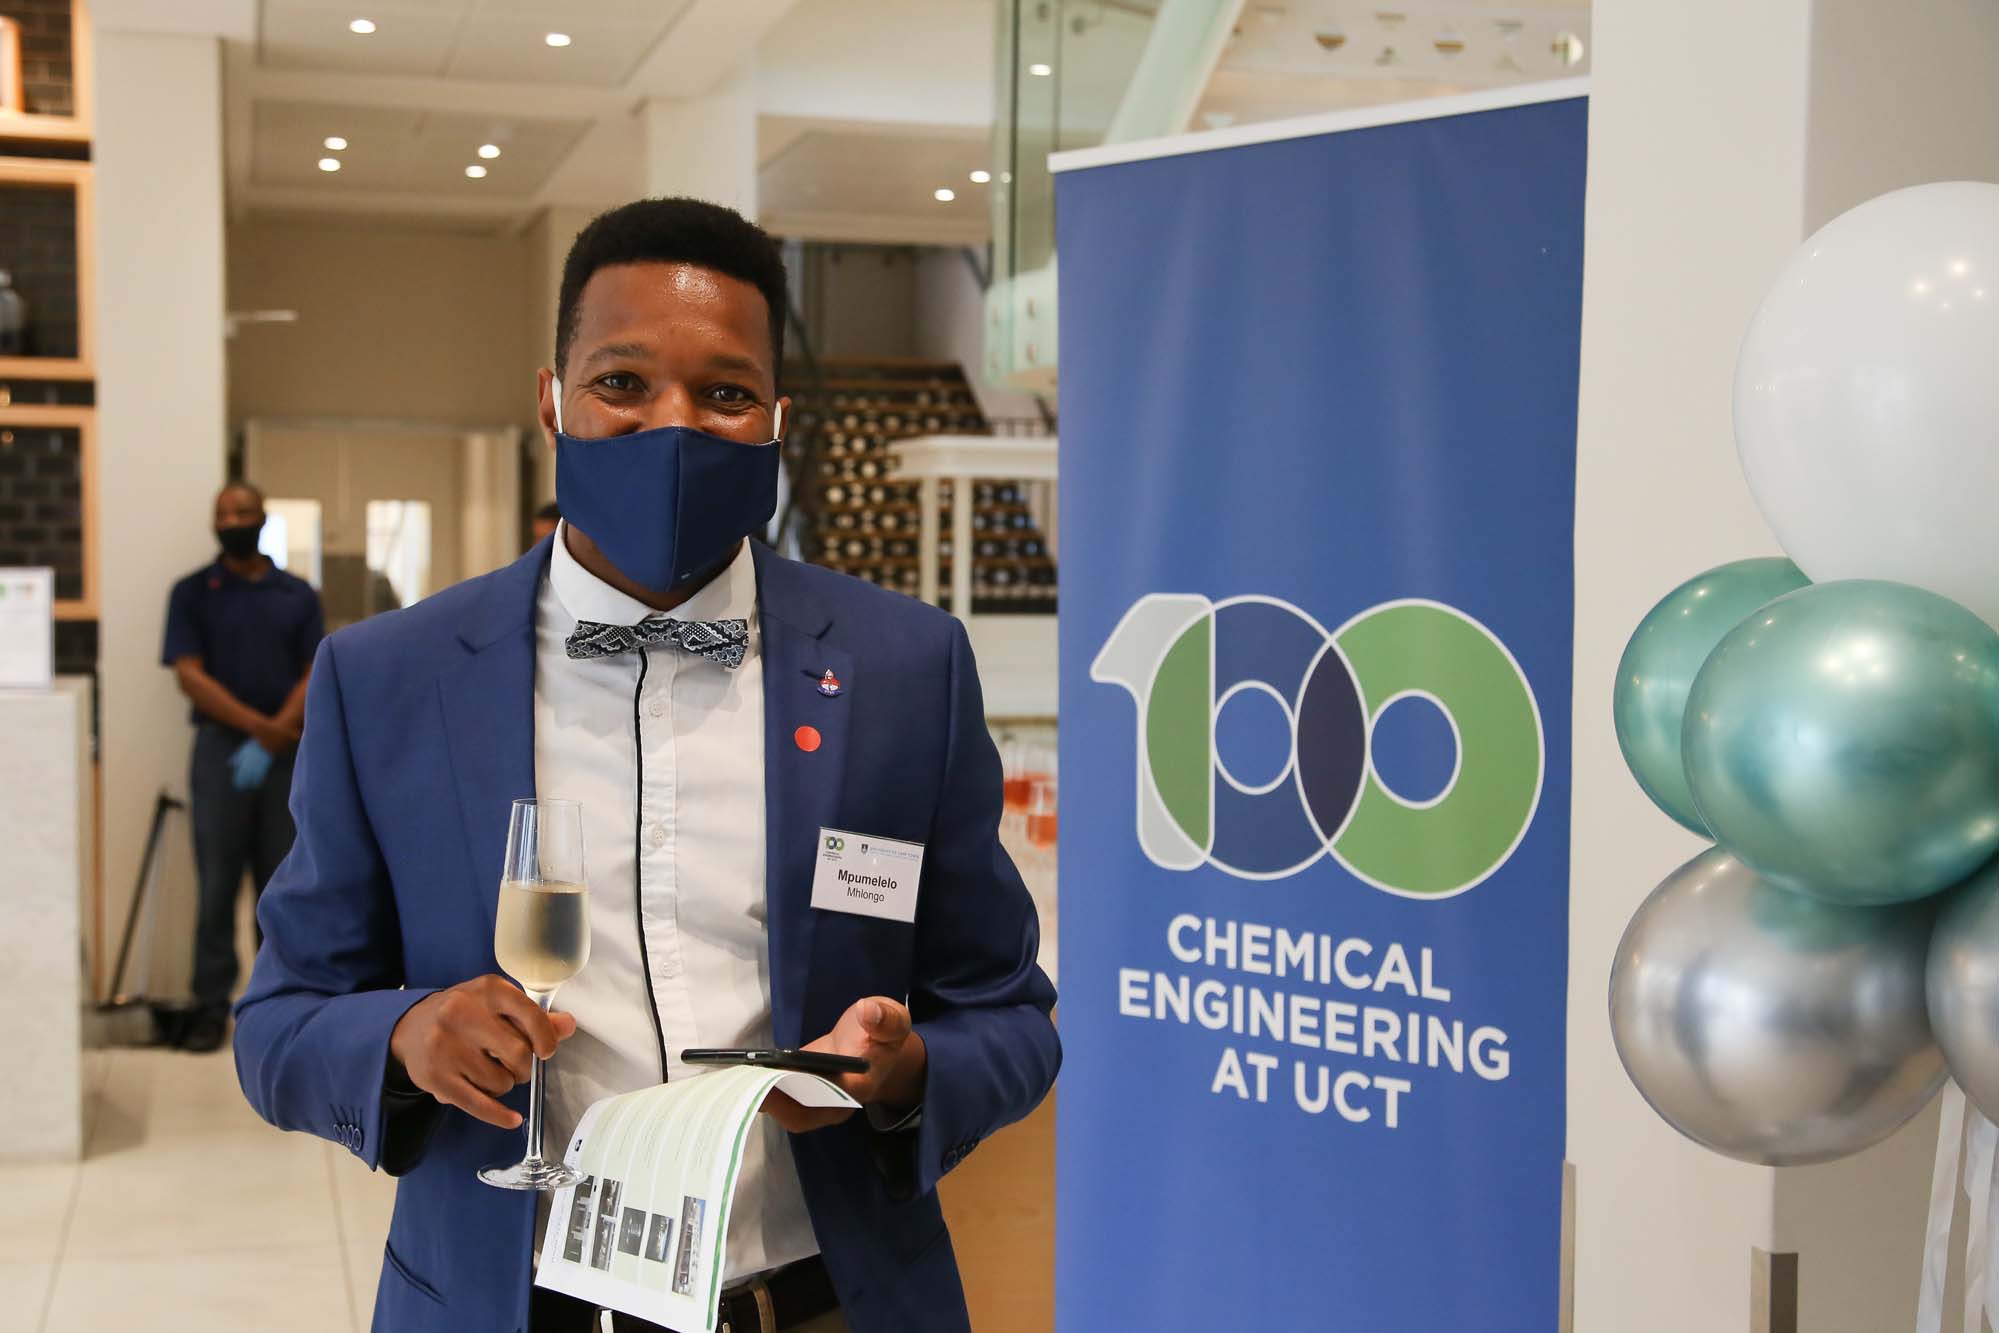 UCT’s Department of Chemical Engineering celebrated its centenary in 2020.